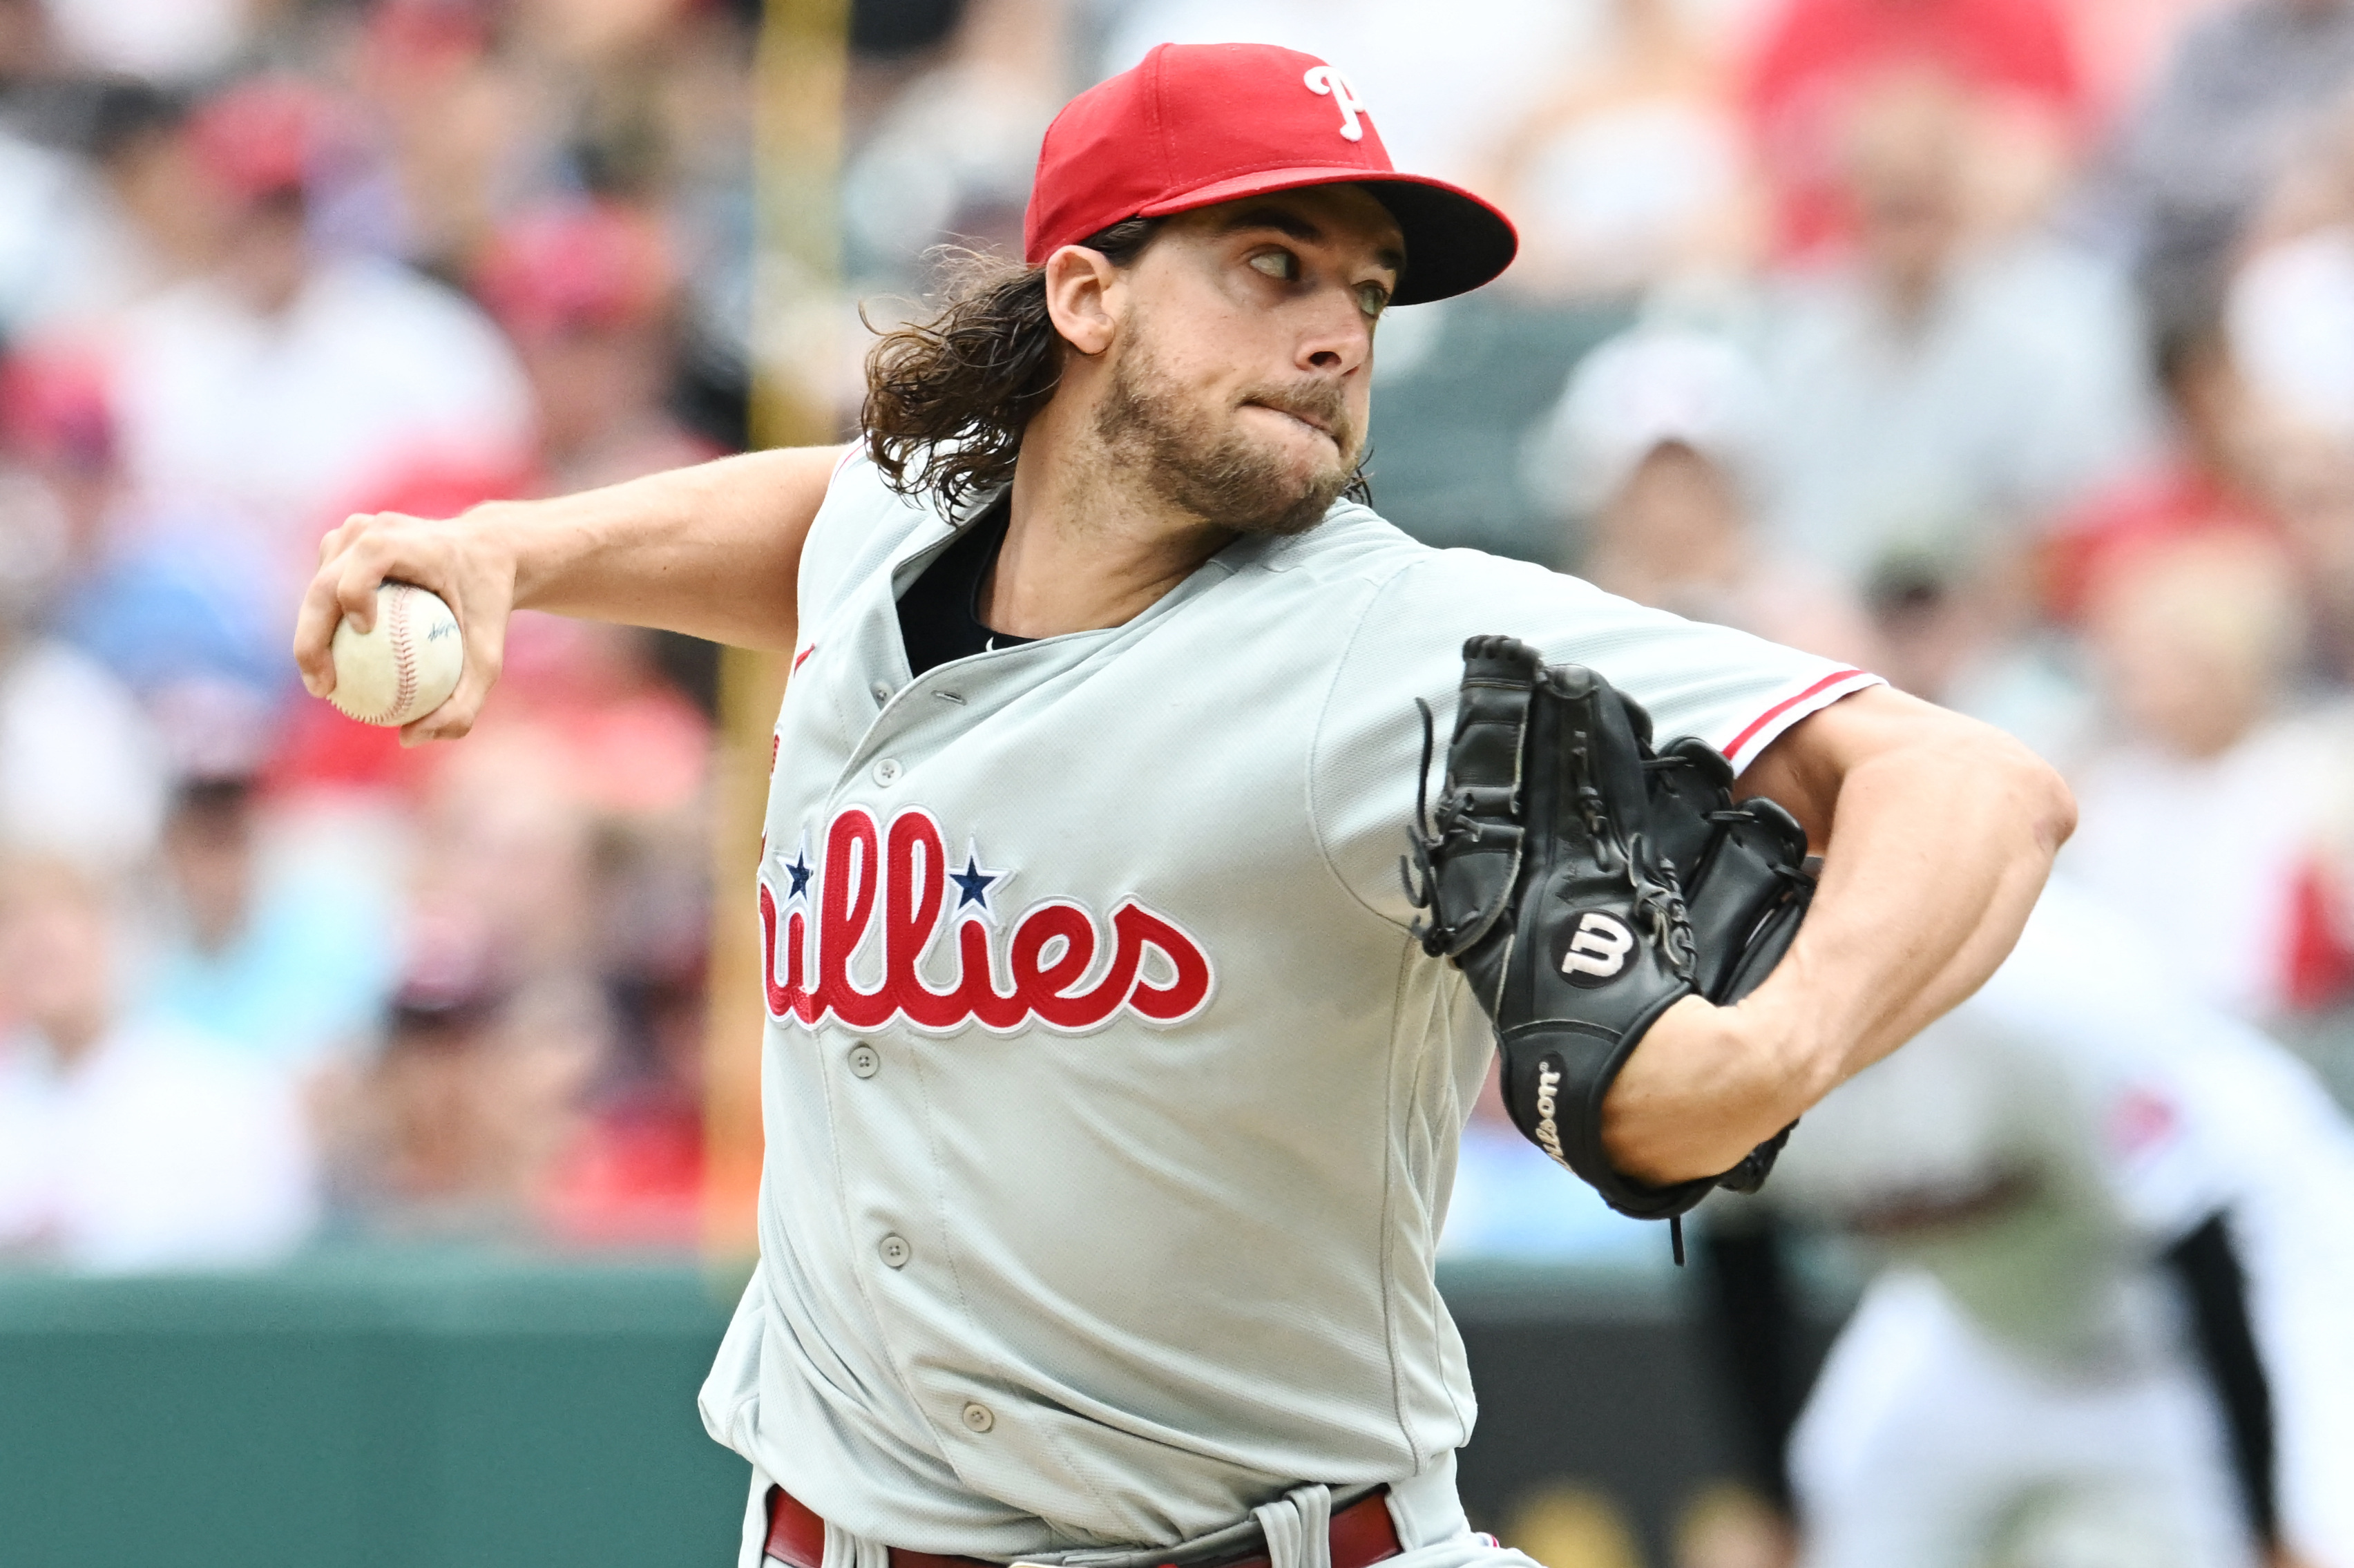 Harper hits 2 solo home runs, Nola pitches 5 innings as Phillies